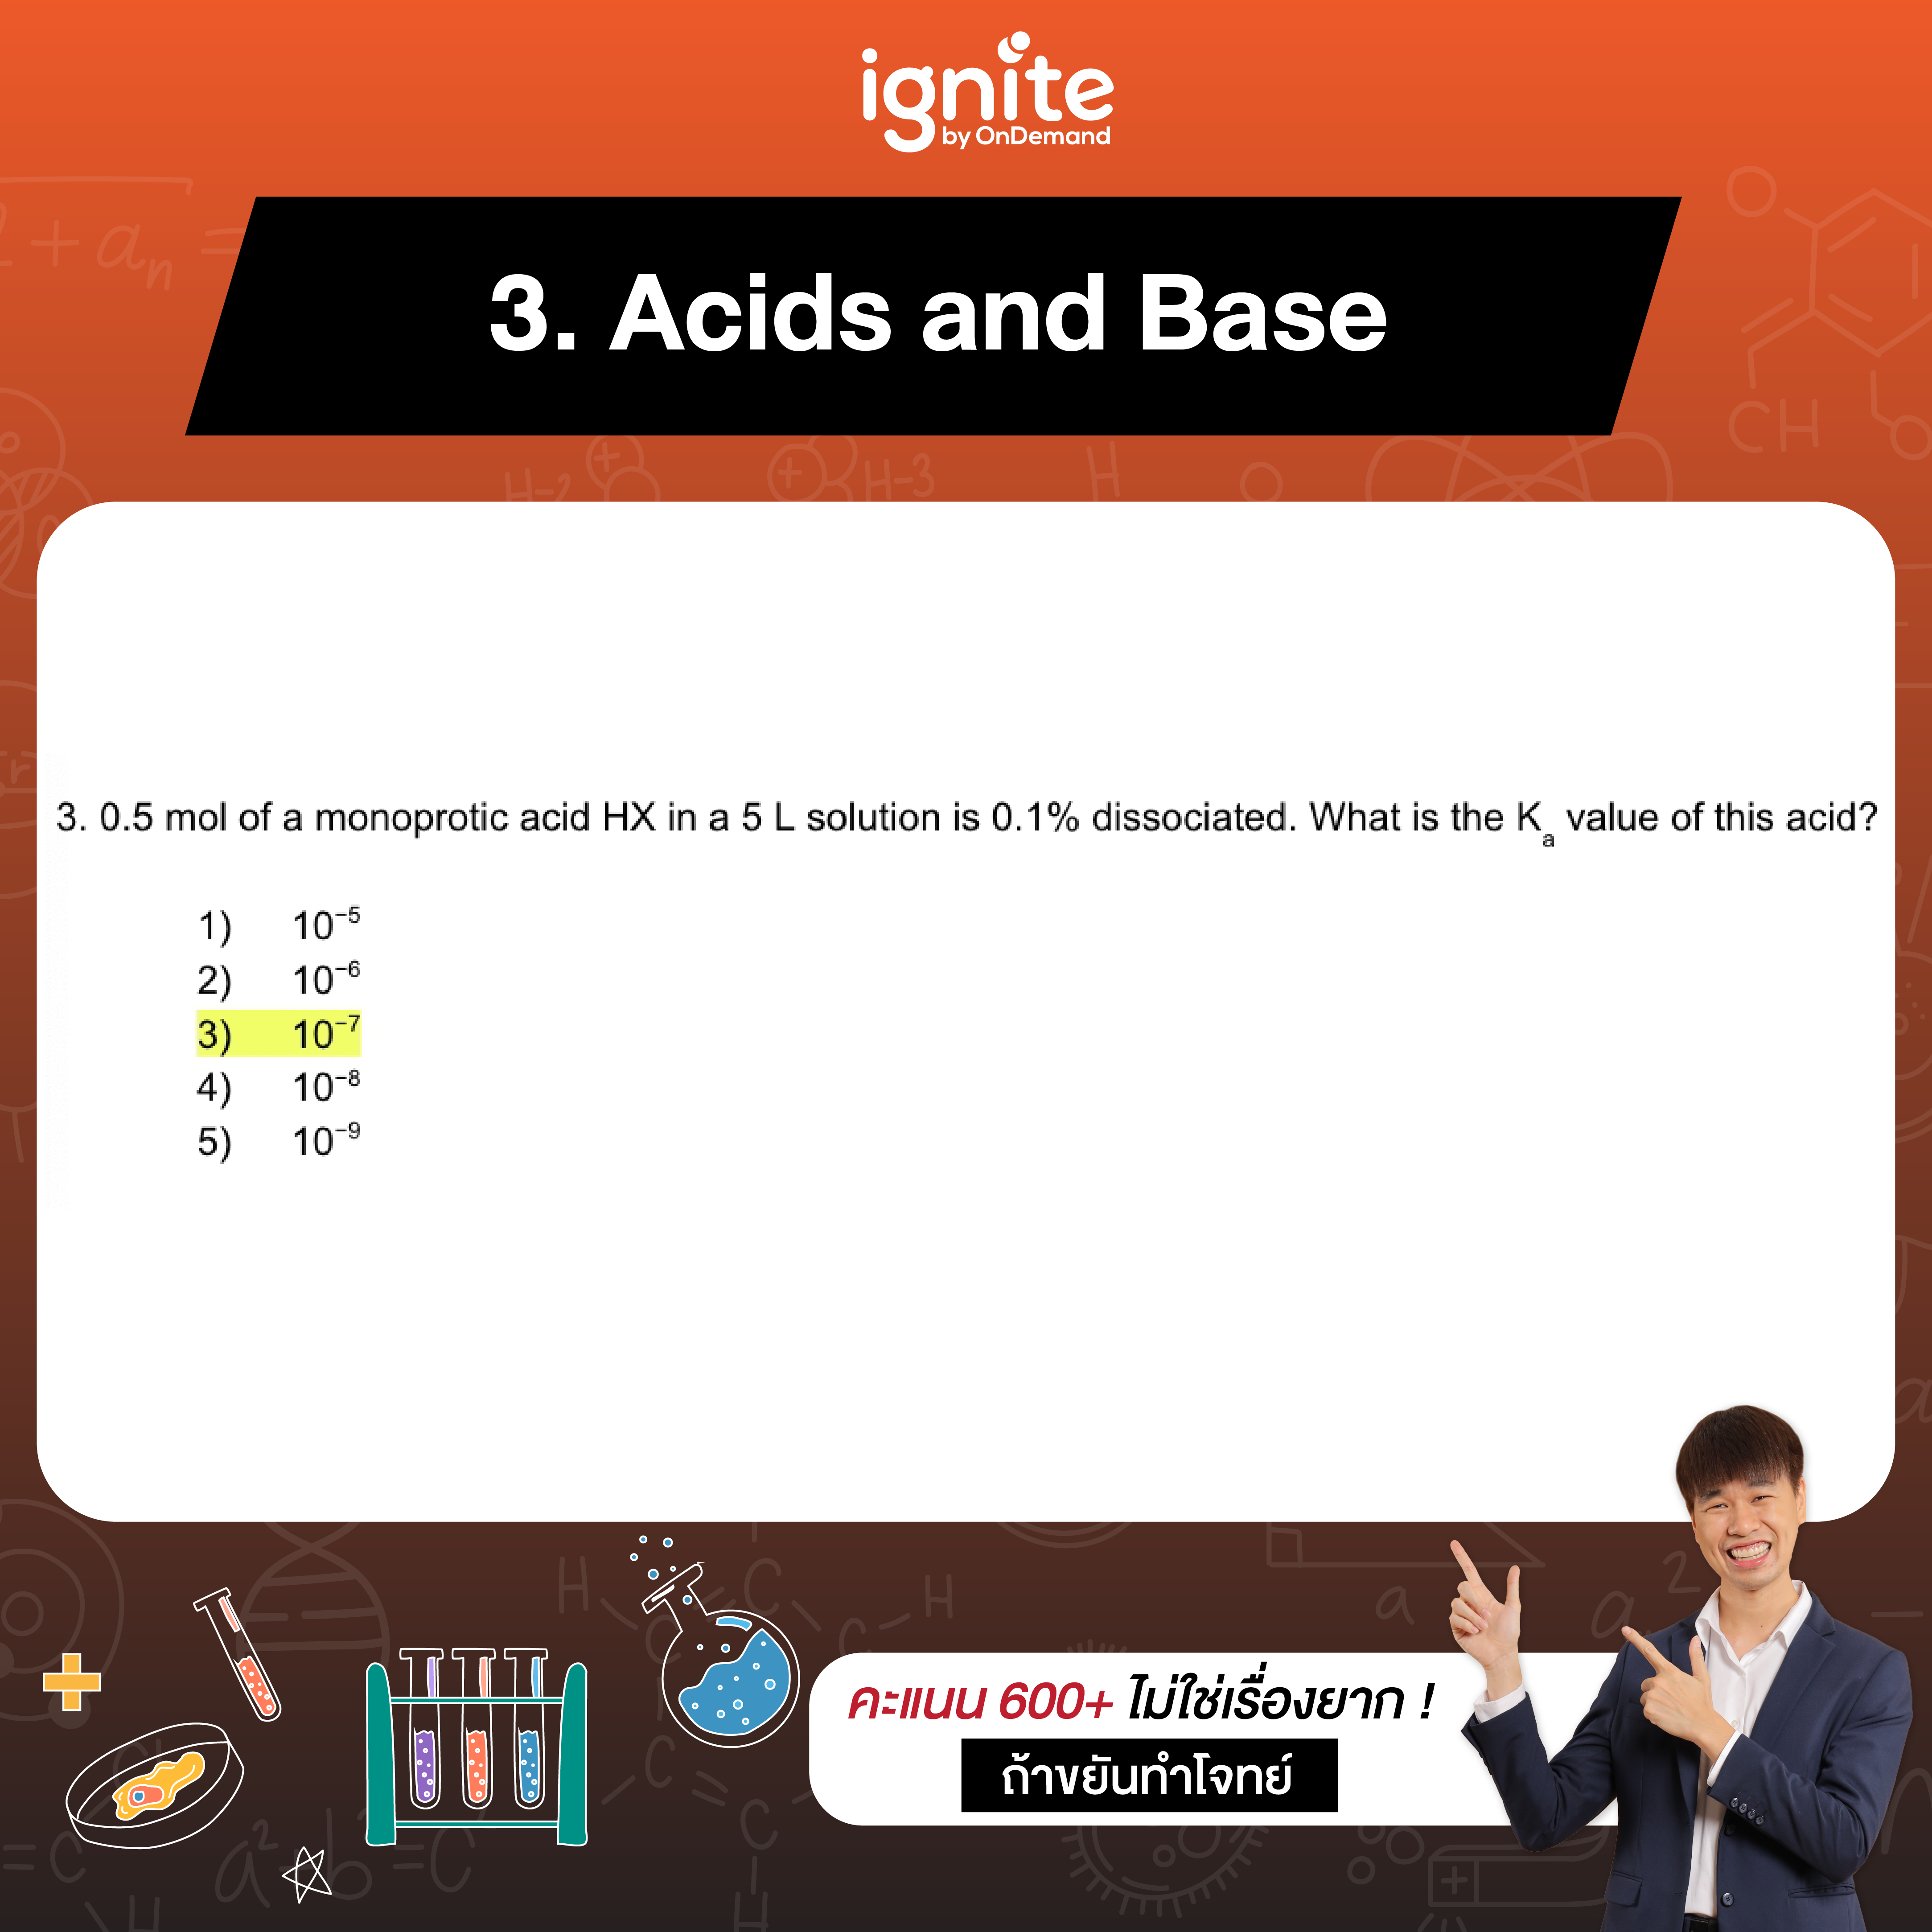 Acids and Base CU-ATS - Chemistry - Jan 2023 - ignite by OnDemand